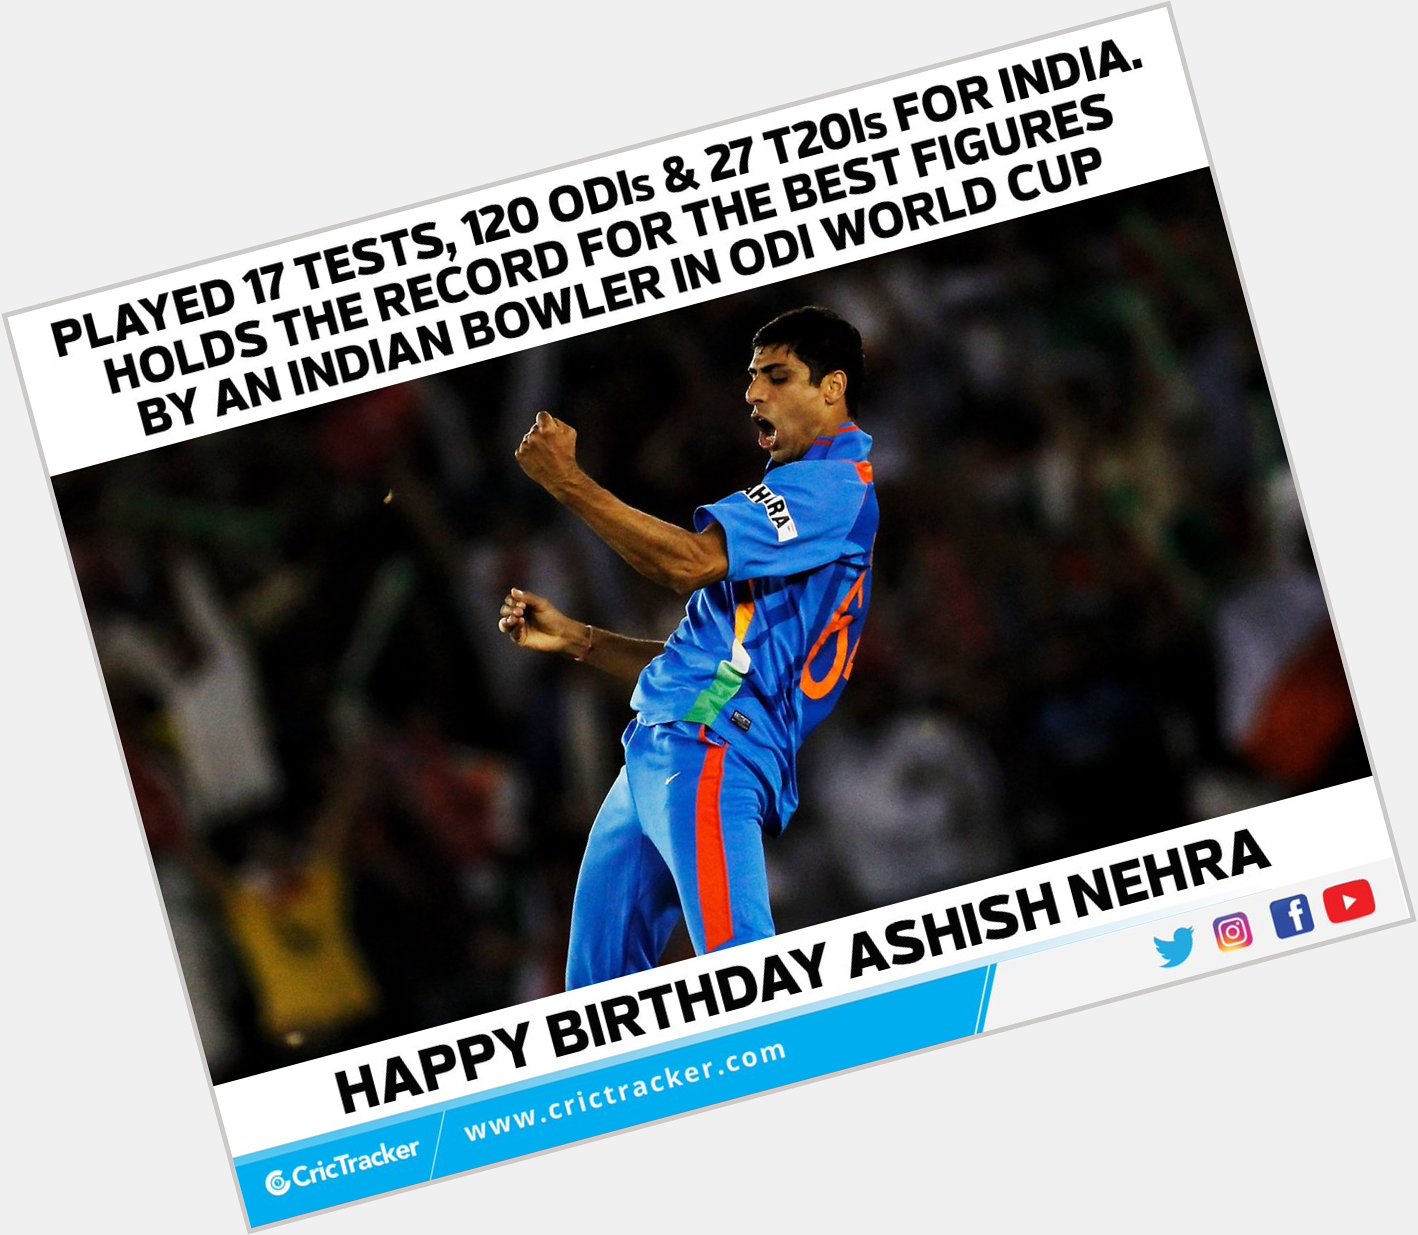 Wishing former Indian pacer Ashish Nehra a very happy birthday. 